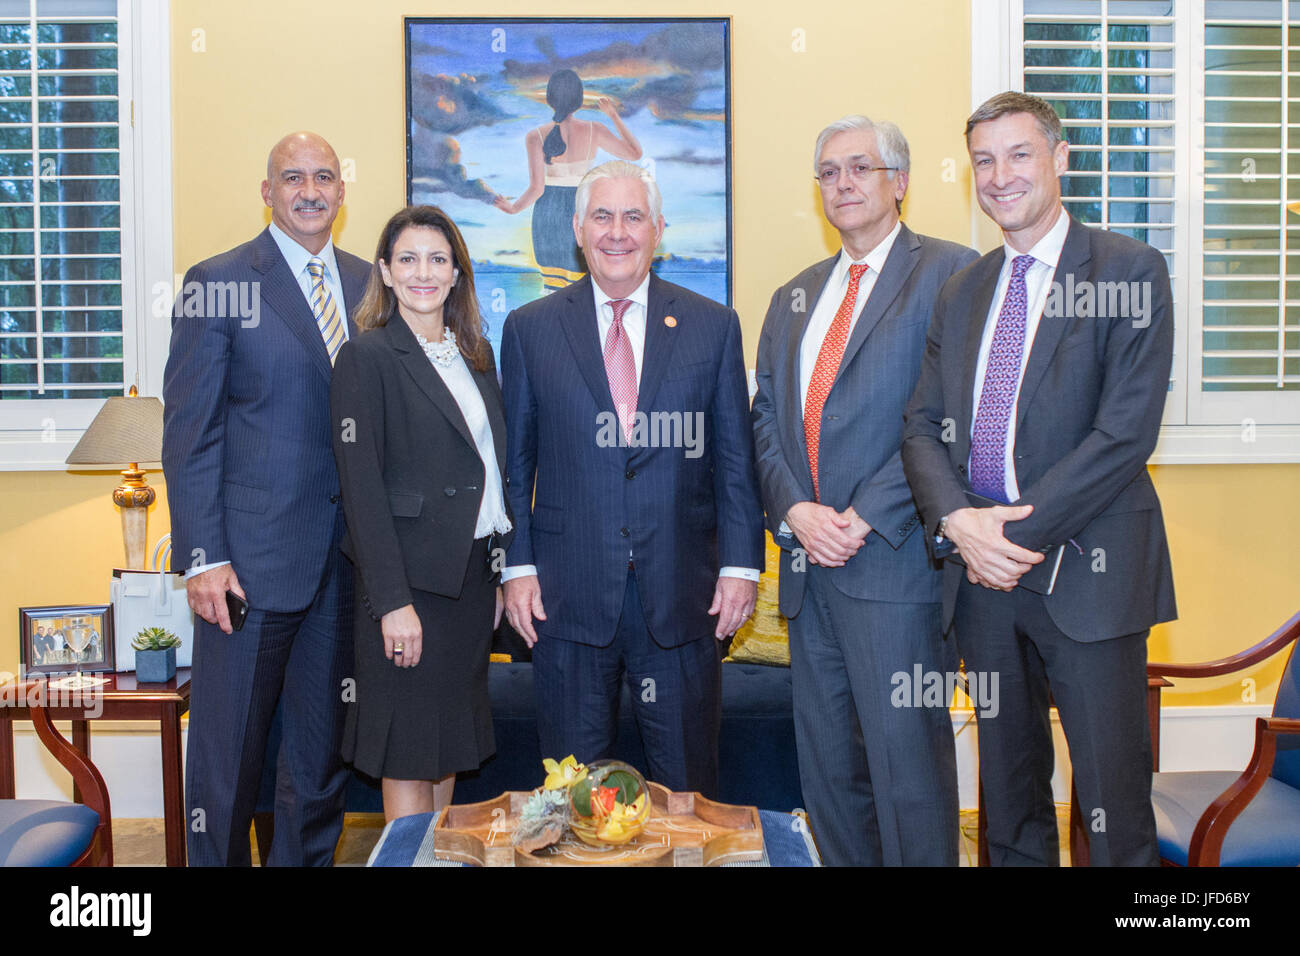 U.S. Secretary of State Rex Tillerson meets with American Business Executives at the Ronald Reagan House after a joint press availability at the Conference for Prosperity and Security in Central America, in Miami, Florida, on June 15, 2017. Stock Photo